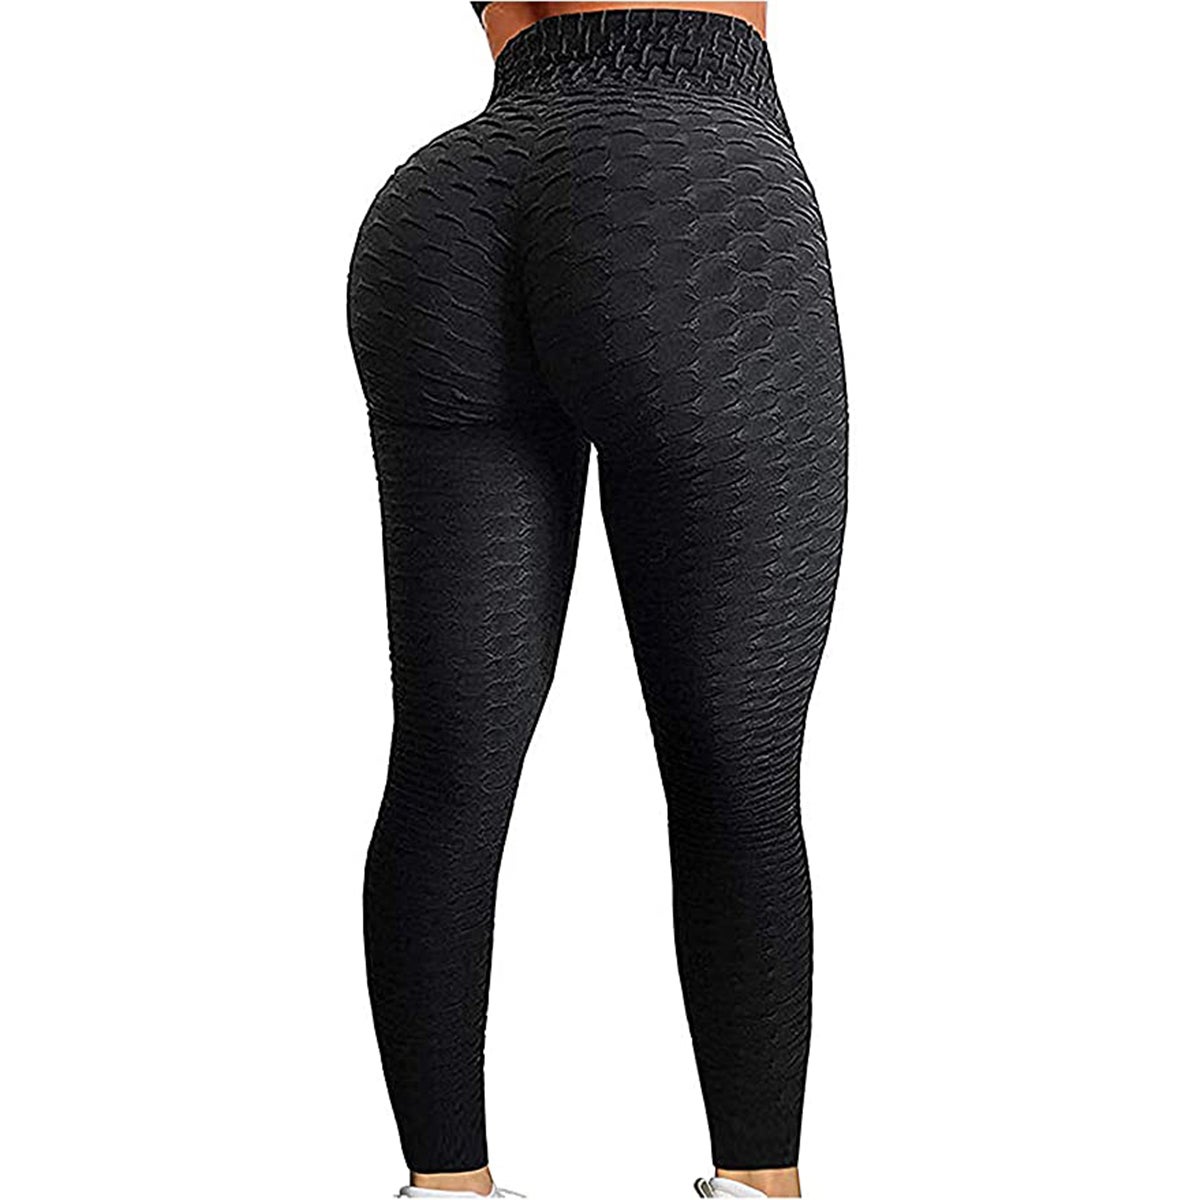 These Crossover Leggings Went Viral On TikTok—And They're On Sale RN 👀